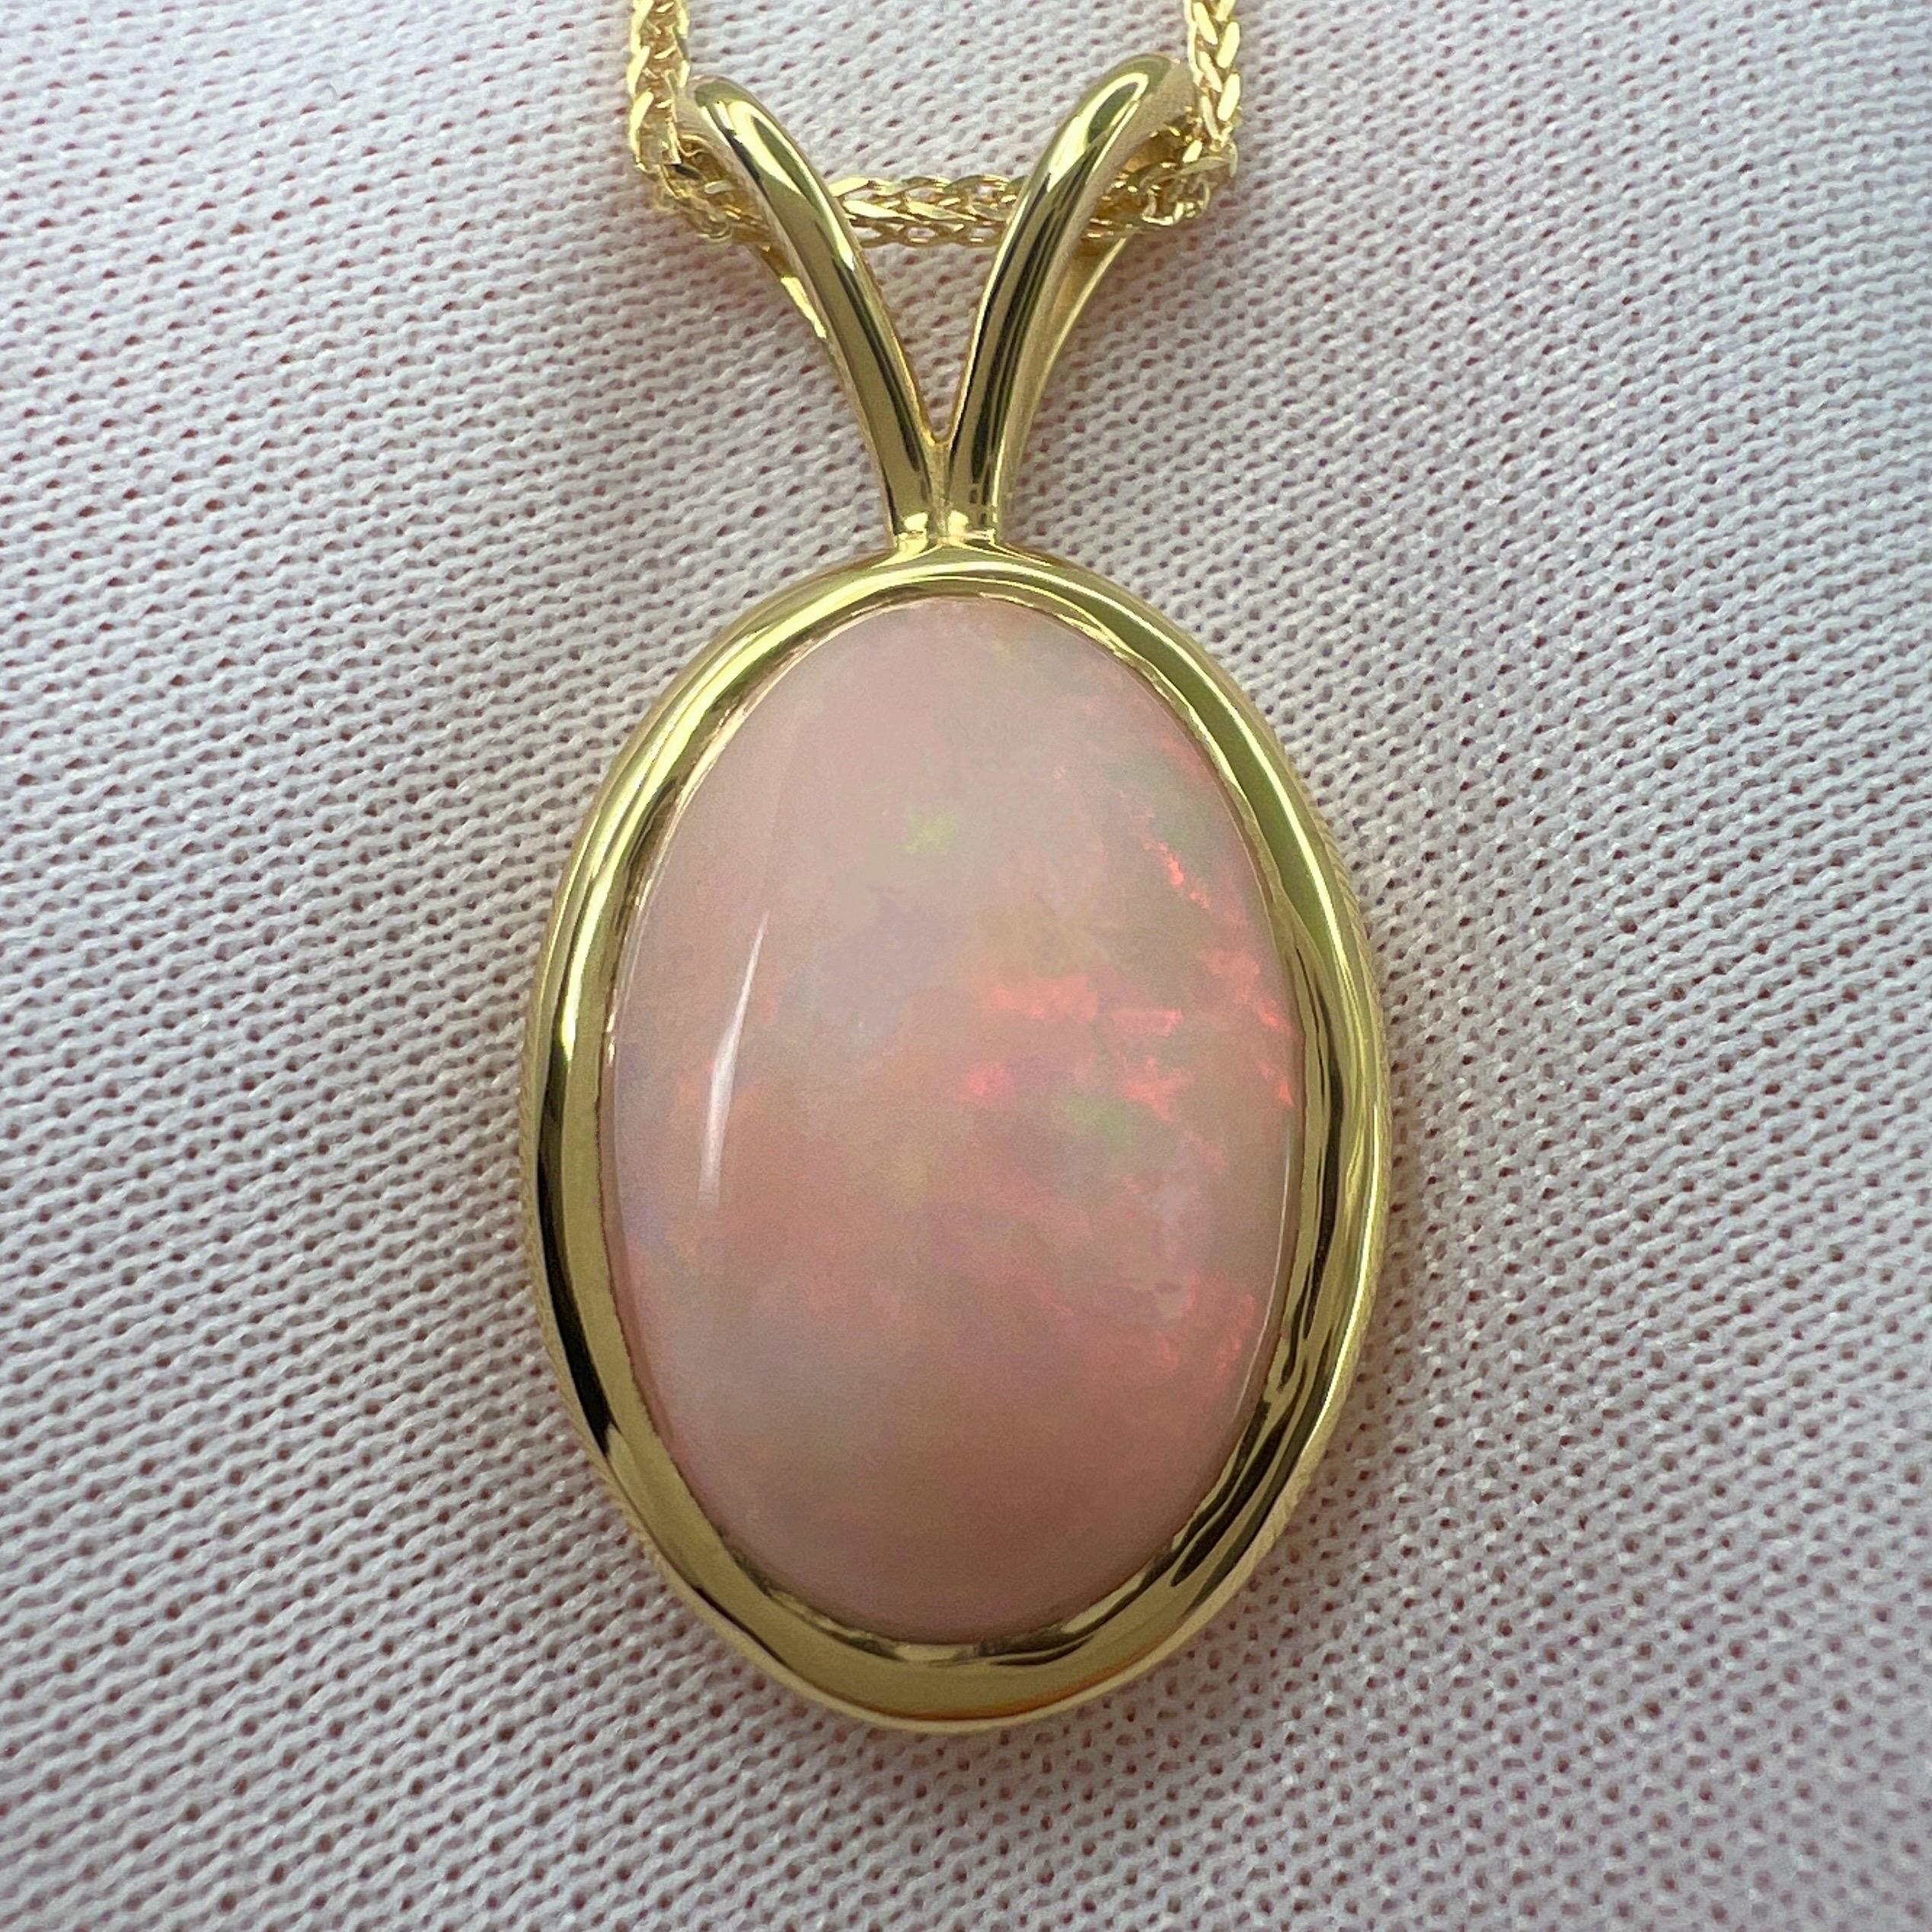 Fine White Opal 18 Karat Yellow Gold Pendant Necklace.

6.15 Carat opal with beautiful play of colour and an excellent oval cabochon cut. Set in a fine 18k yellow gold rubover bezel solitaire pendant. 
Stunning solid opal with an excellent polish